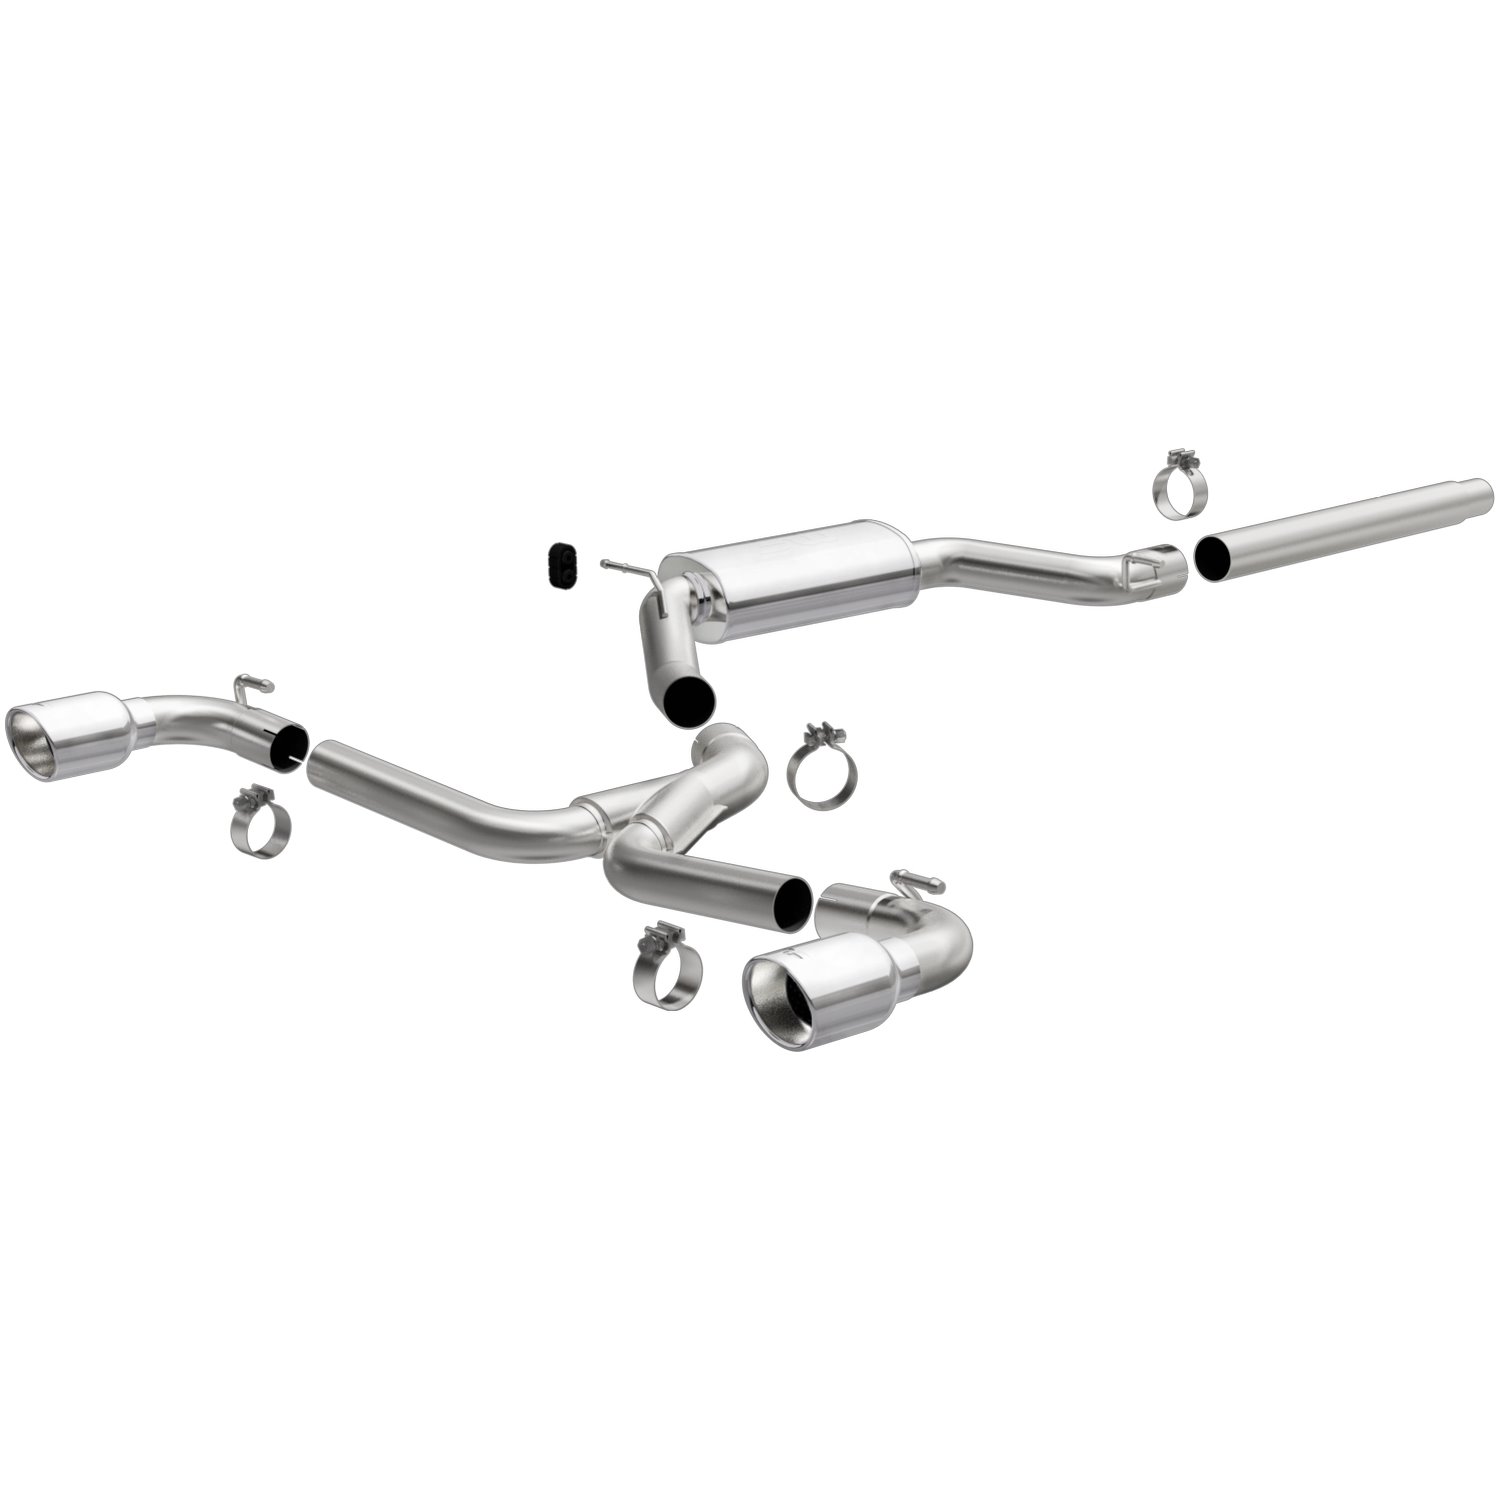 Touring Series Cat-Back Exhaust System 2018-2019 VW GTI 2.0L L4